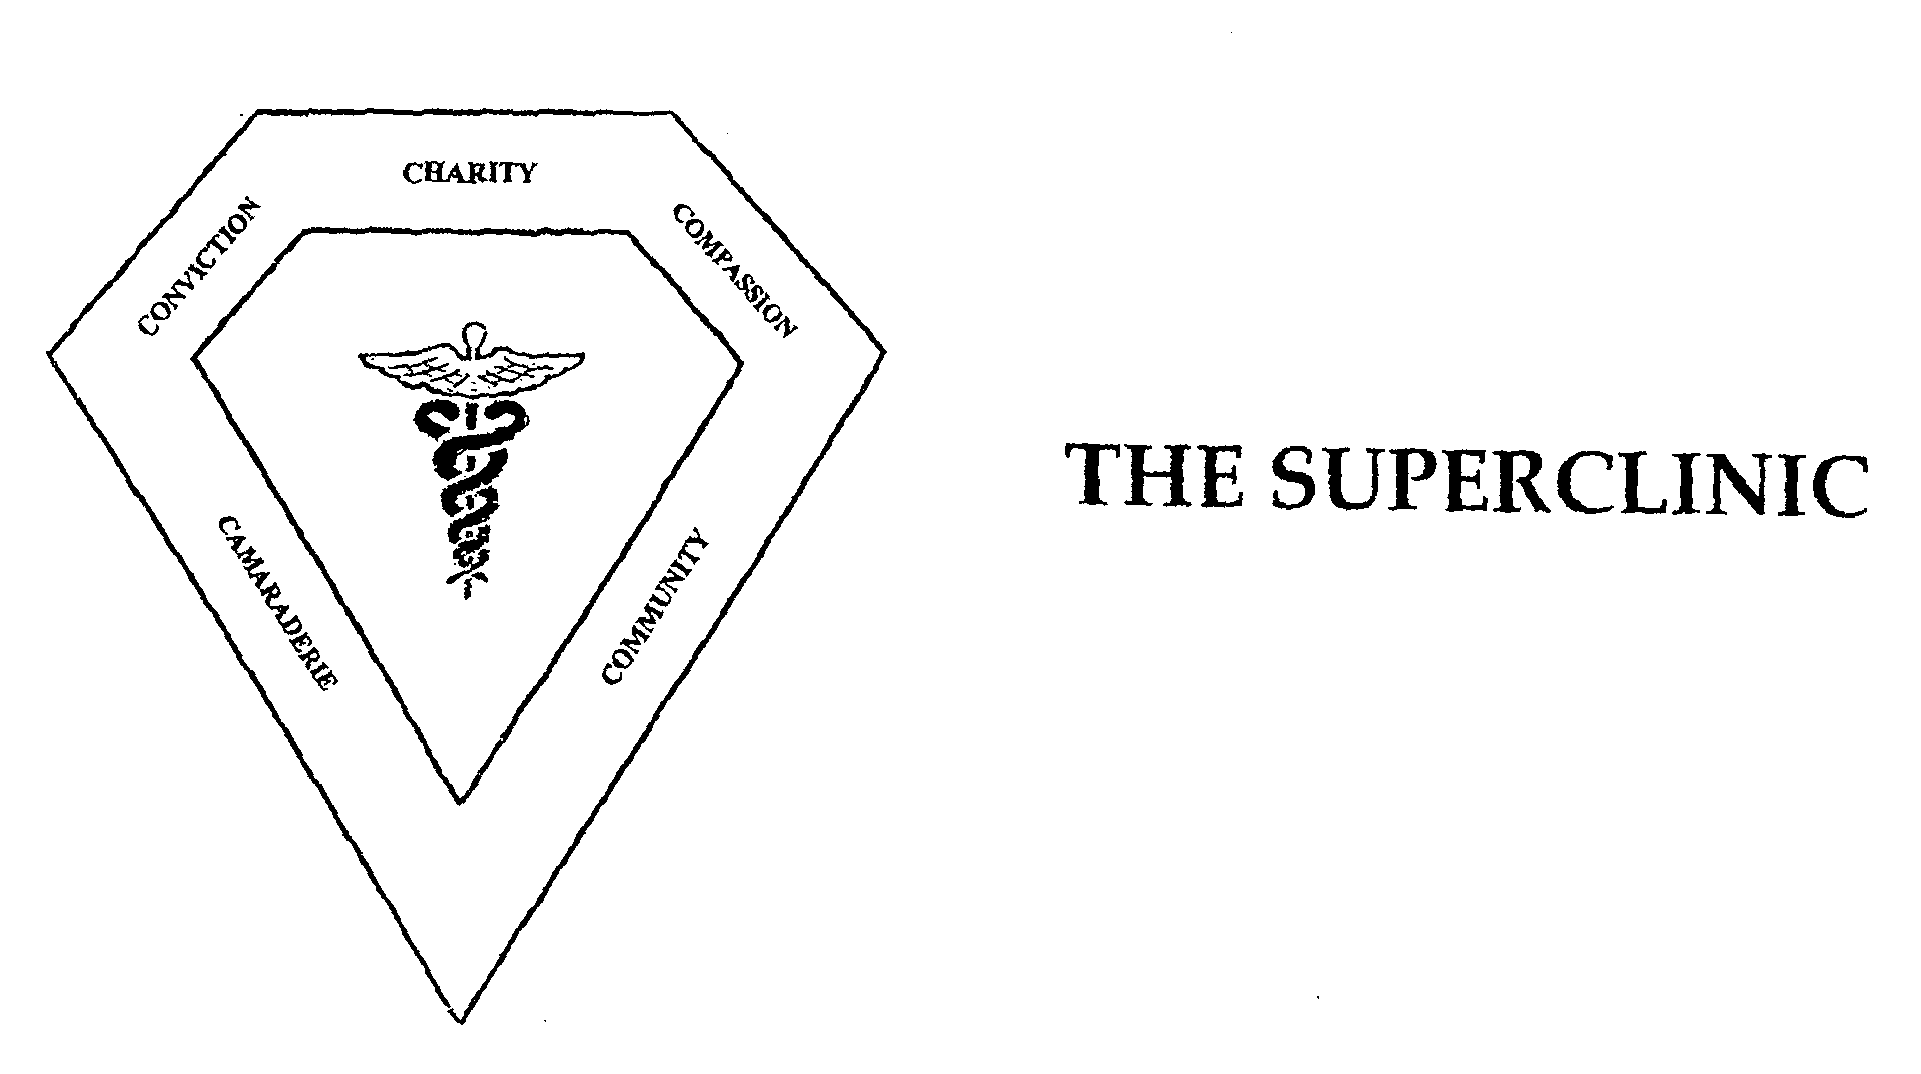  THE SUPERCLINIC CHARITY COMPASSION COMMUNITY CAMARADERIE CONVICTION